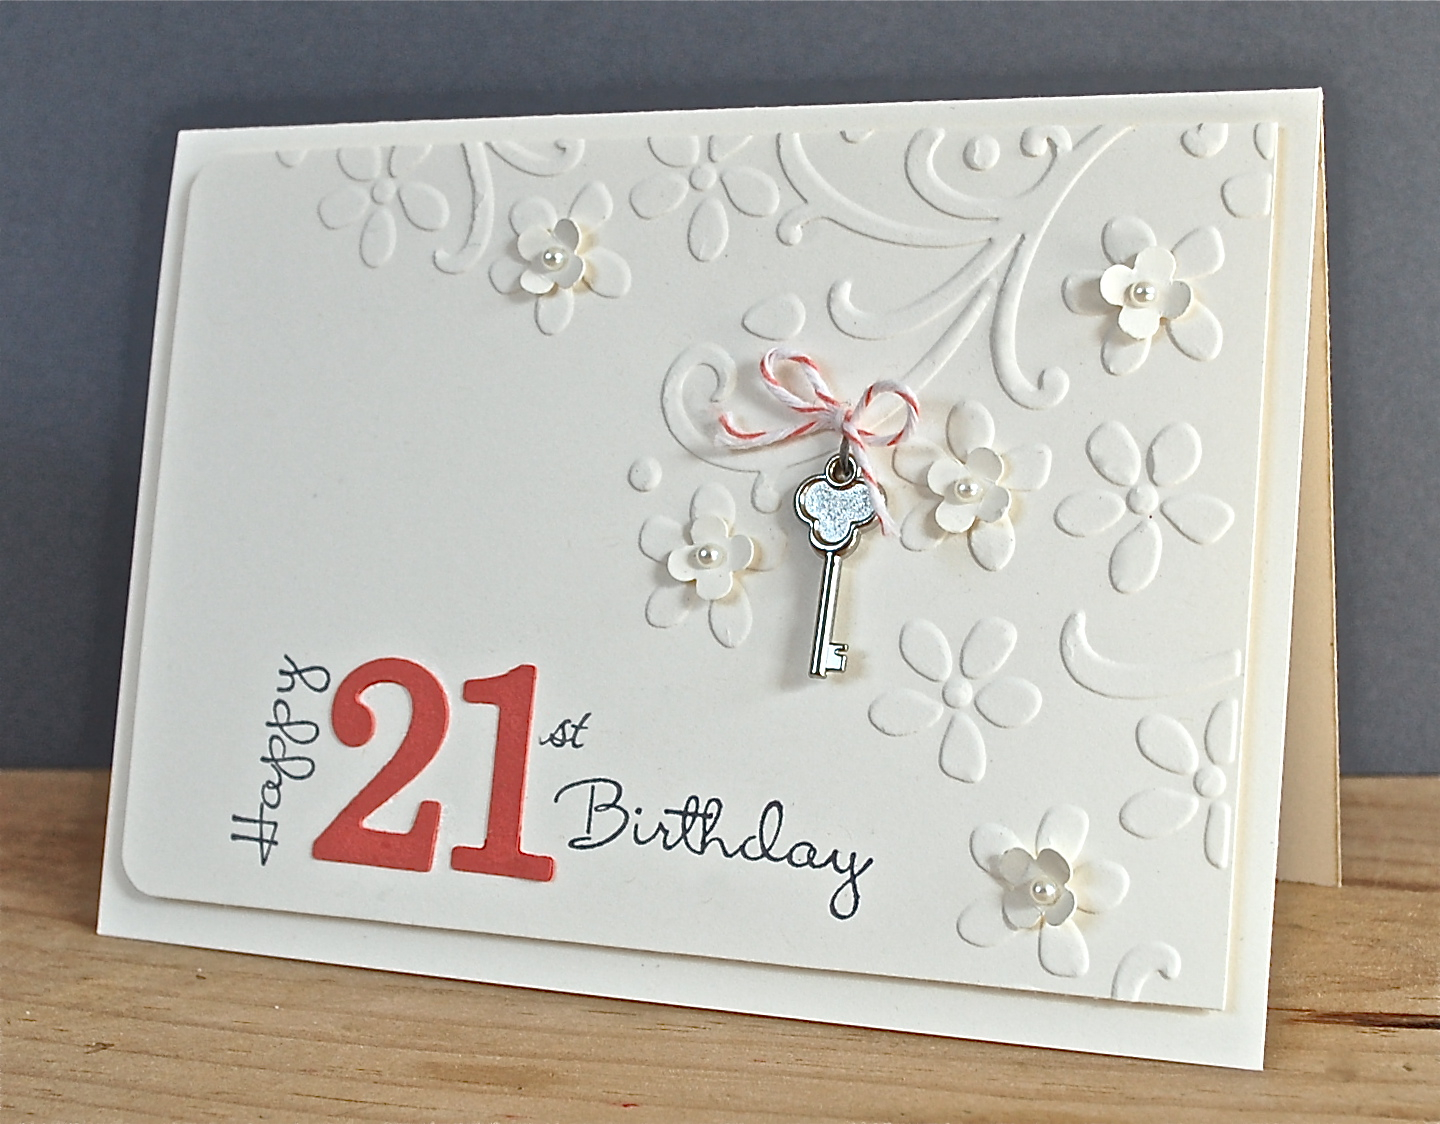 21St Birthday Card Ideas Crafting Ideas And Supplies From Vicky At Crafting Clares Paper